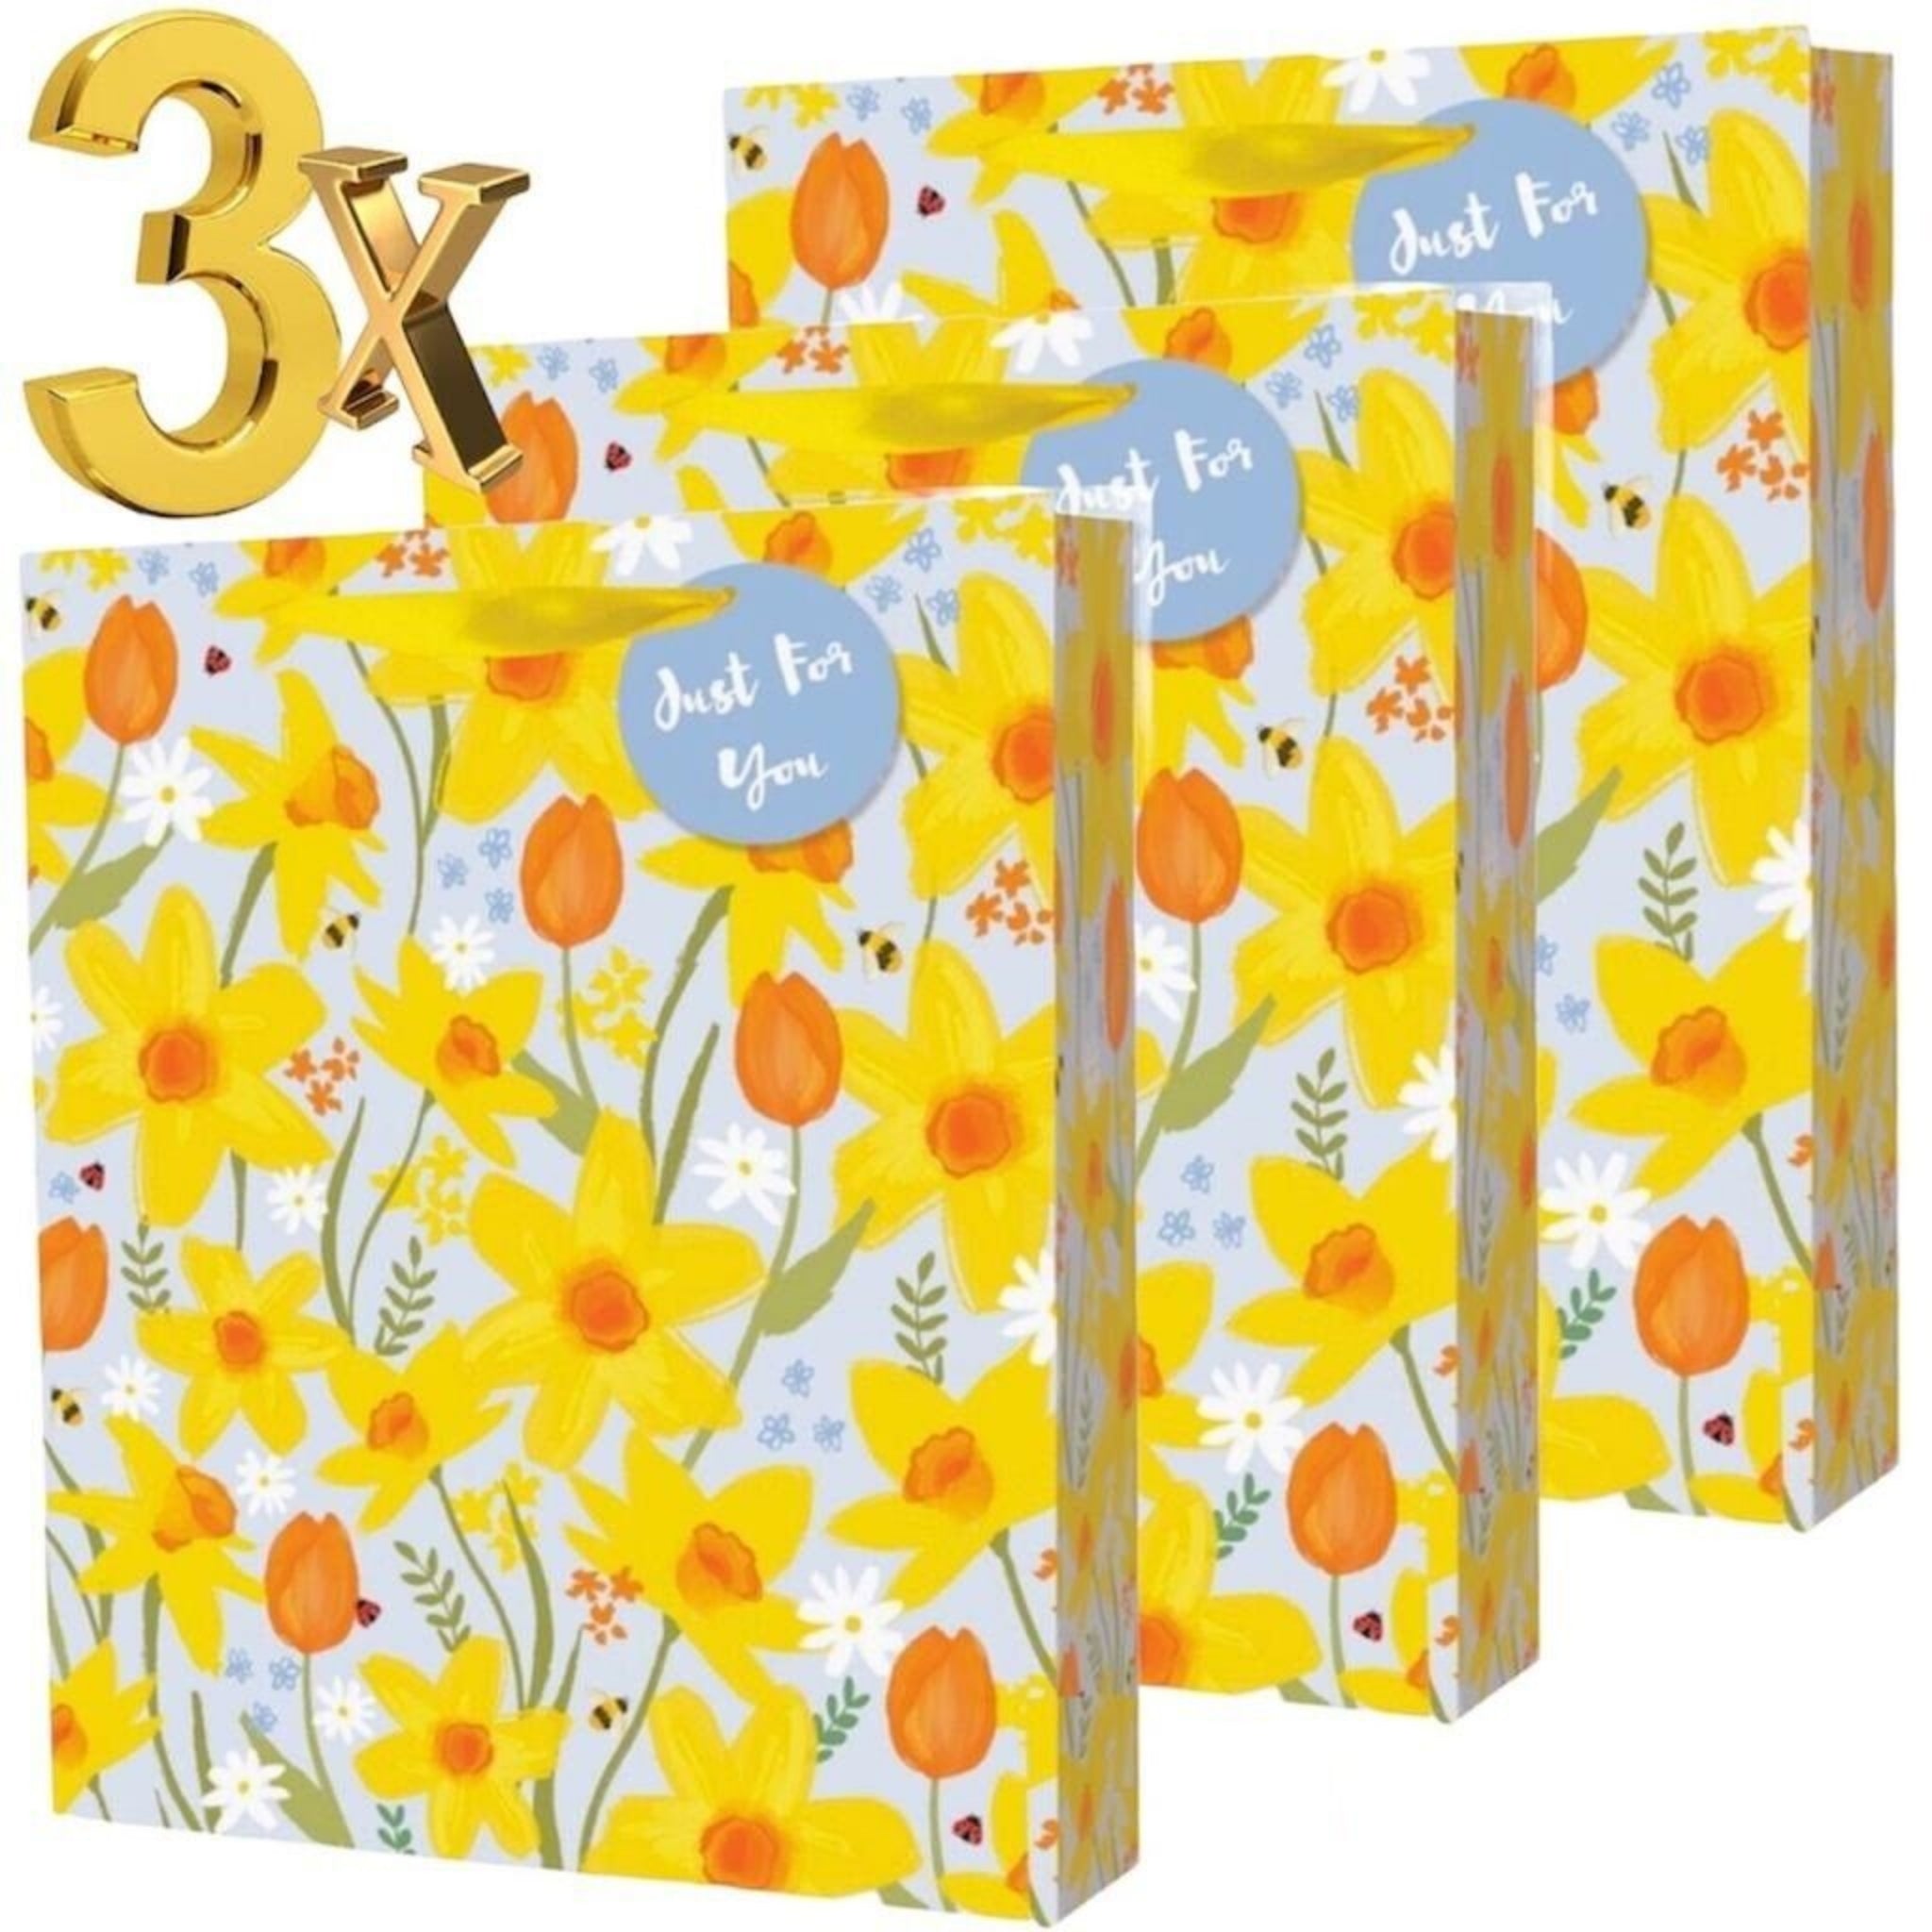 Beclen Harp 3x L/M Size Luxury Easter Traditional Daisy Flowers/Floral Print Present/Gift Bags With ''Just For You'' Tags